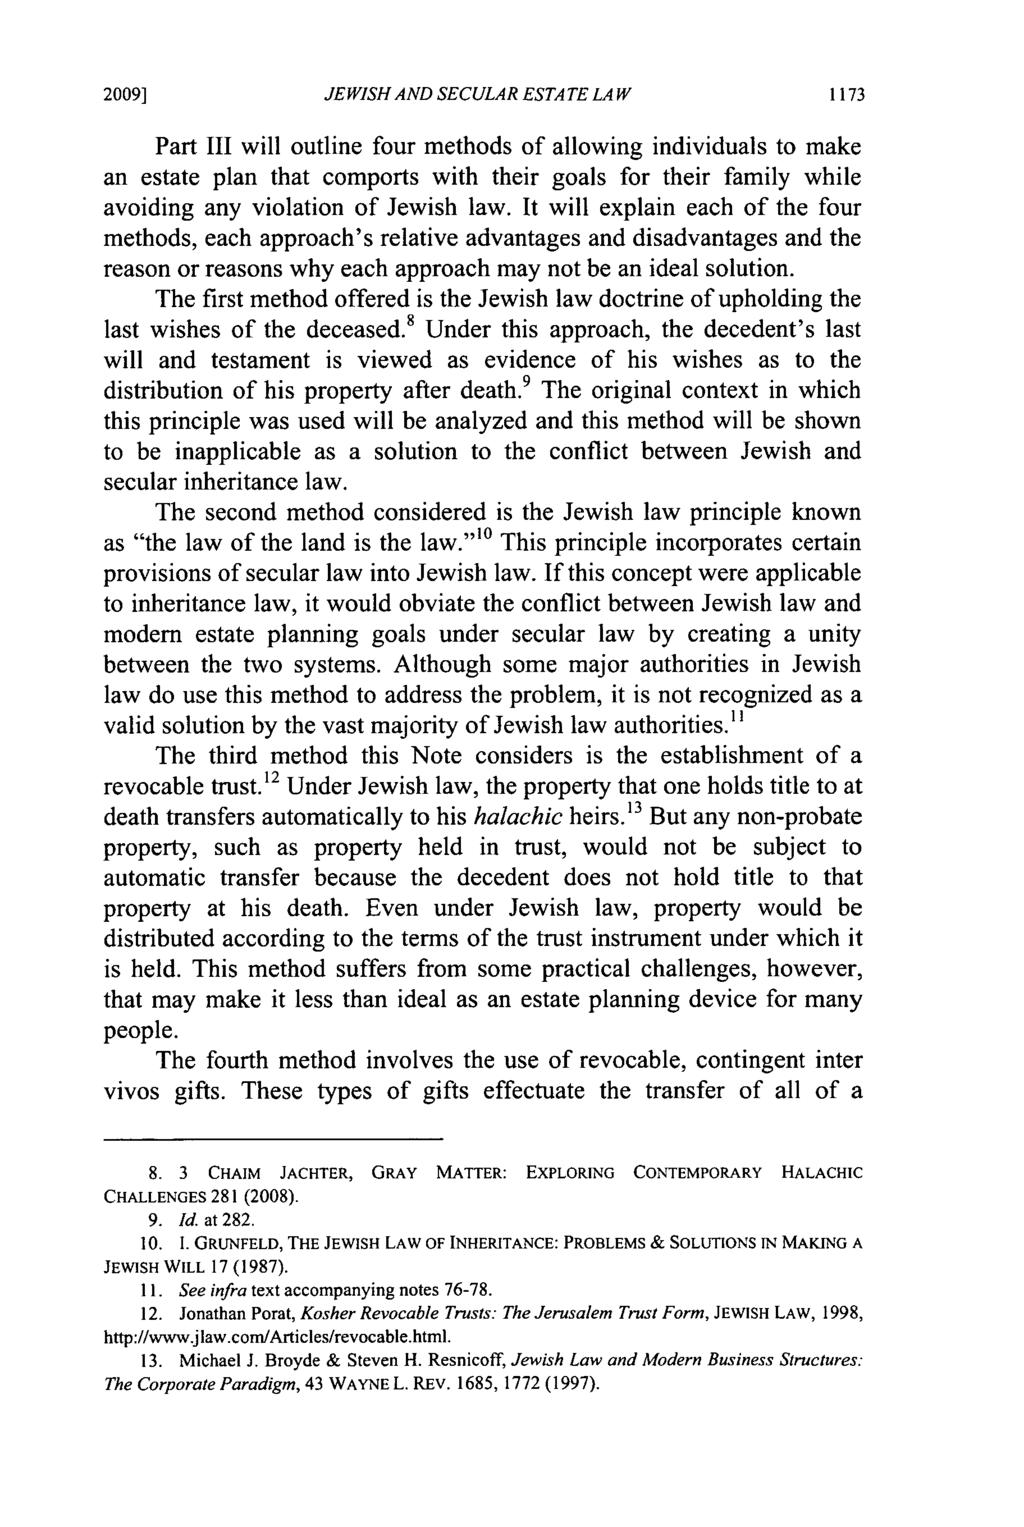 2009] Wolf: Resolving the Conflict Between Jewish and Secular Estate Law JEWISH AND SECULAR ESTATE LAW Part III will outline four methods of allowing individuals to make an estate plan that comports